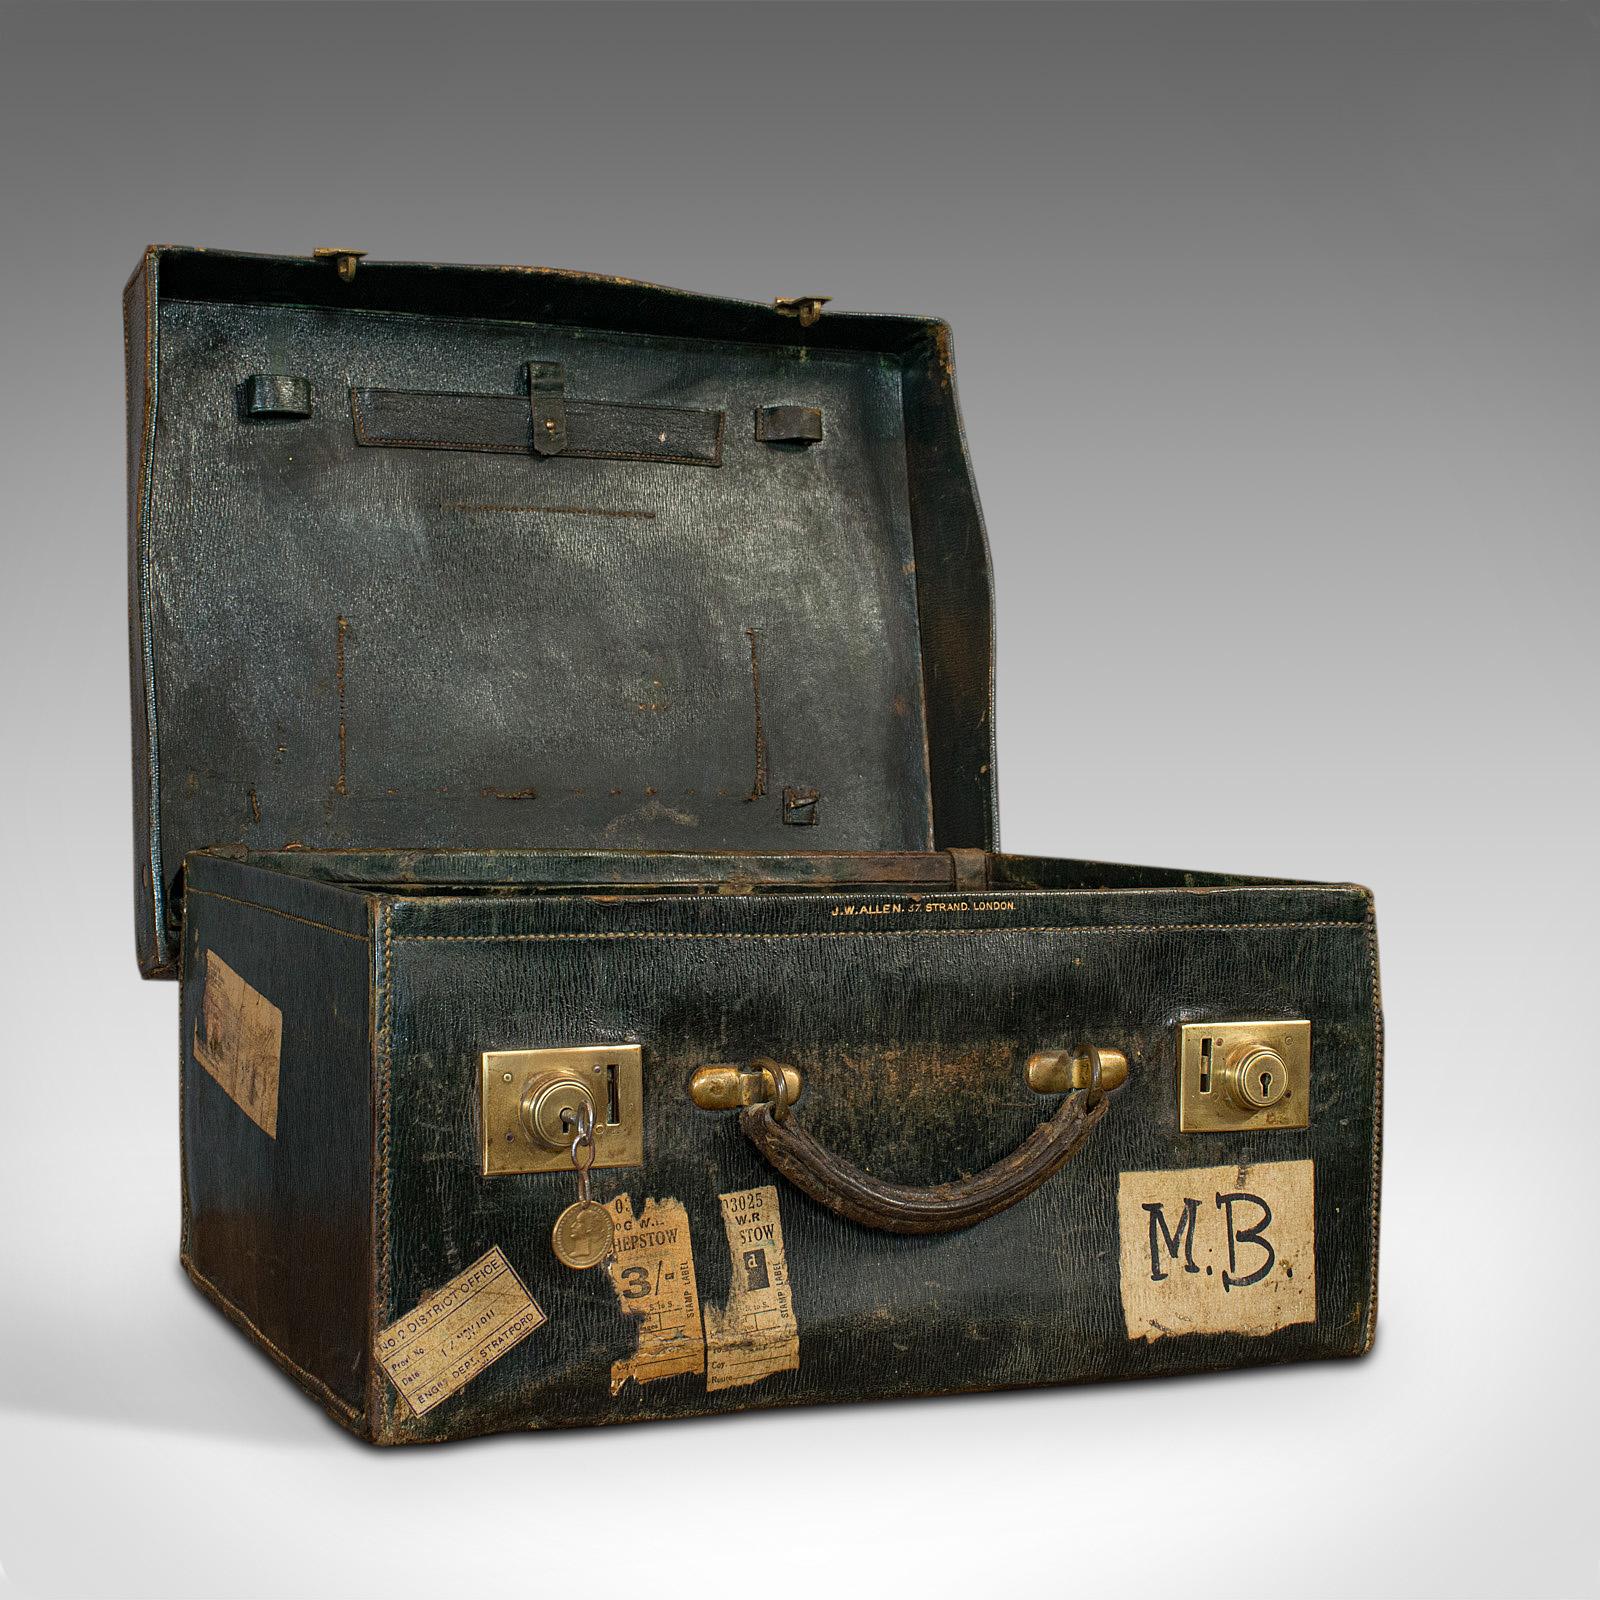 This is an antique travel case. An English, leather salesman's suitcase, by JW Allen, of 37 Strand in London, dating to the Edwardian period, circa 1910.

Quality Edwardian luggage
Displays a desirable aged patina
Stitched leather exterior in